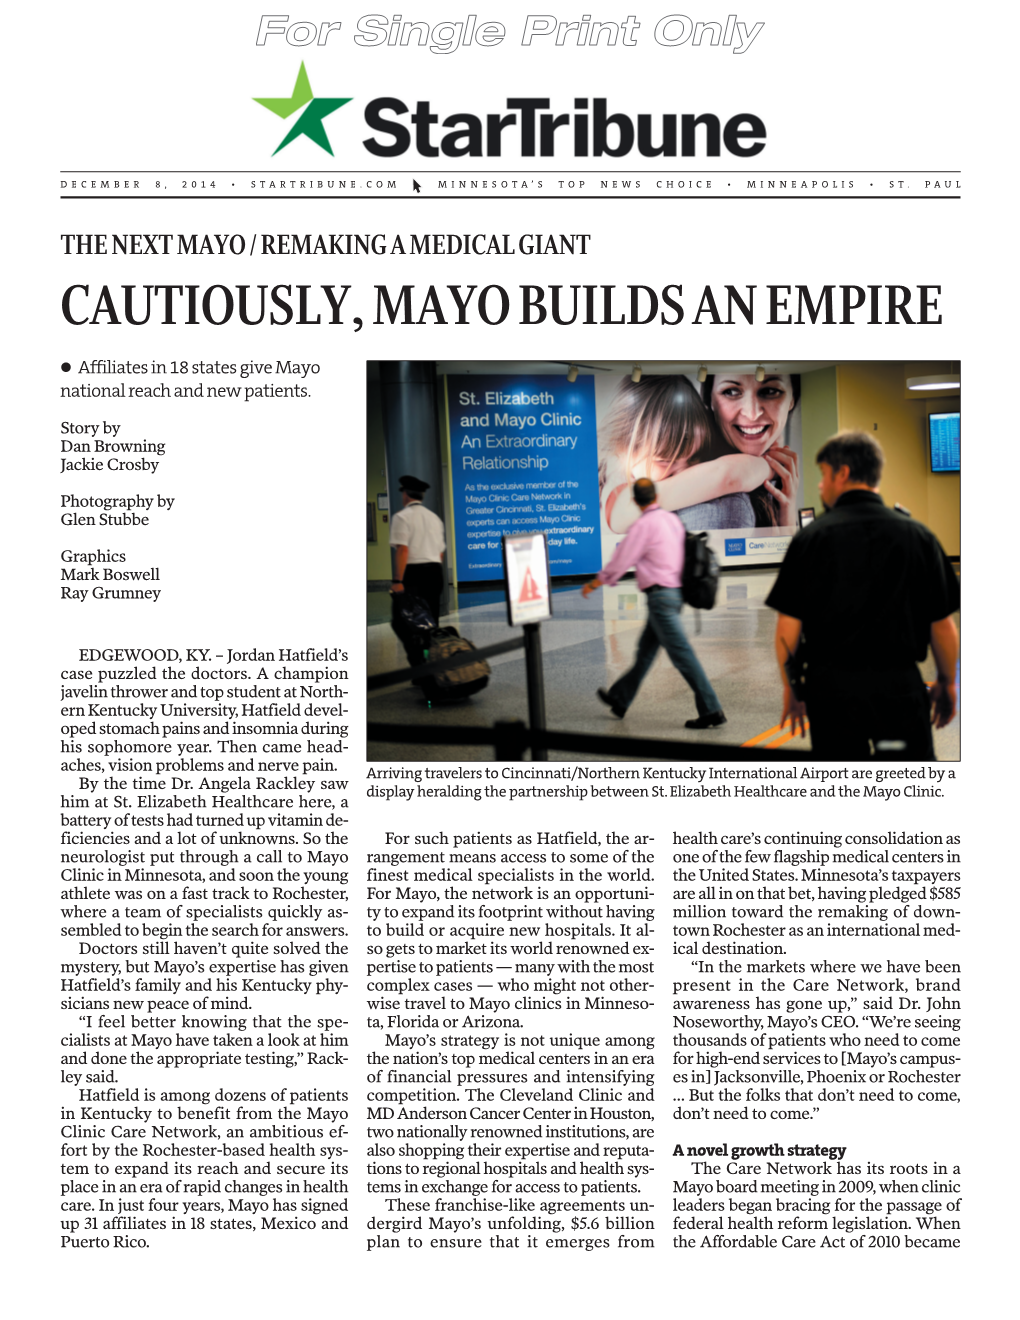 Cautiously, Mayo Builds an Empire